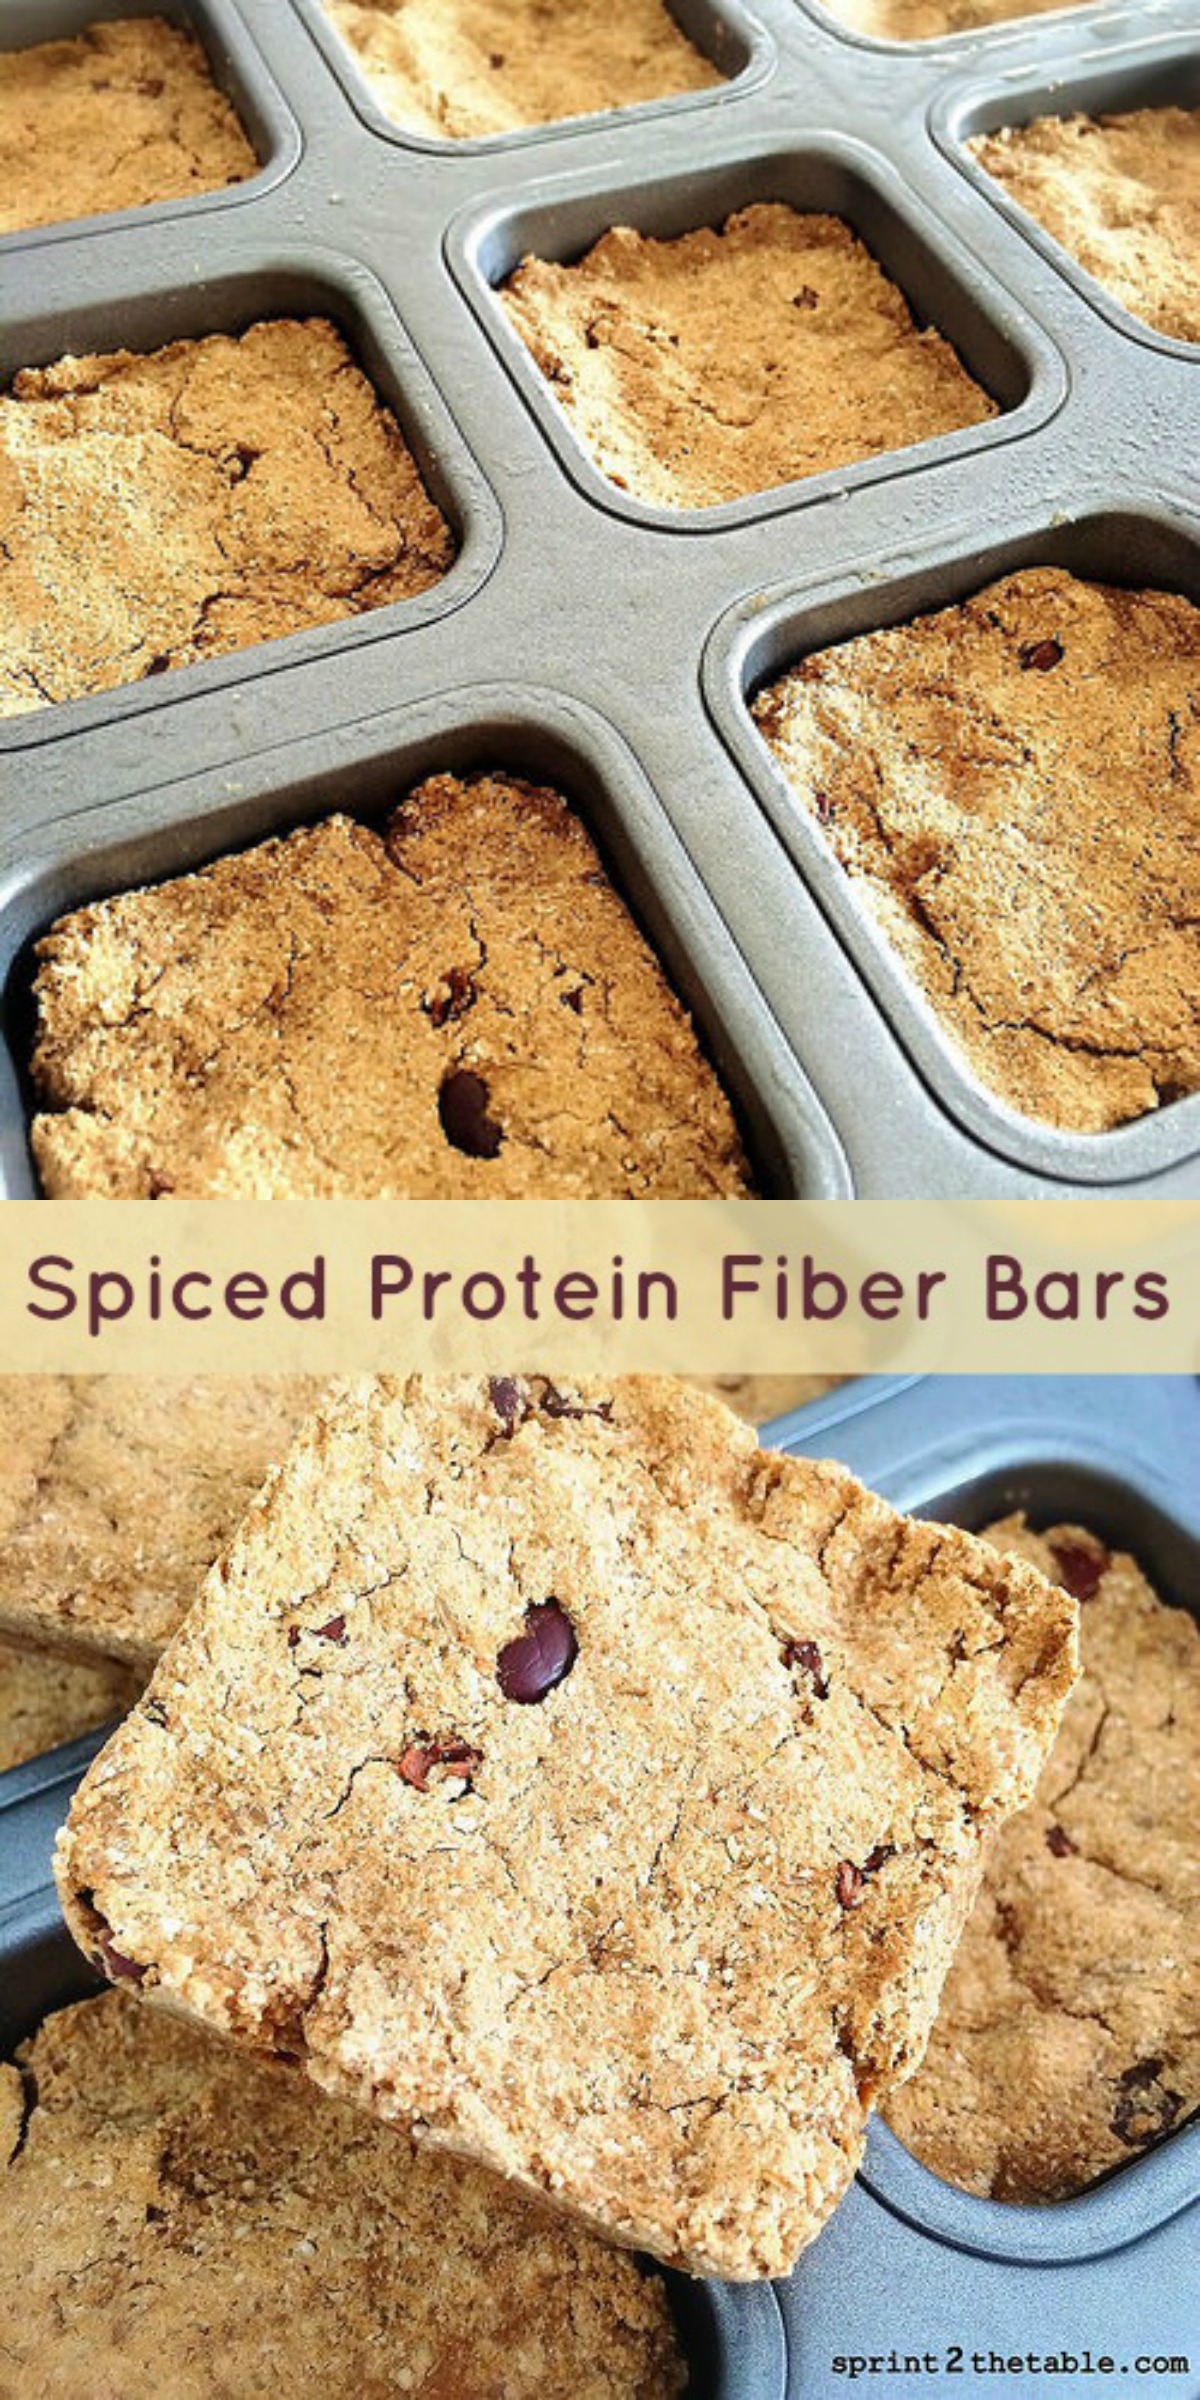 spiced-protein-fiber-bars-healthy-gluten-free-snack-that-also-helps-regulate